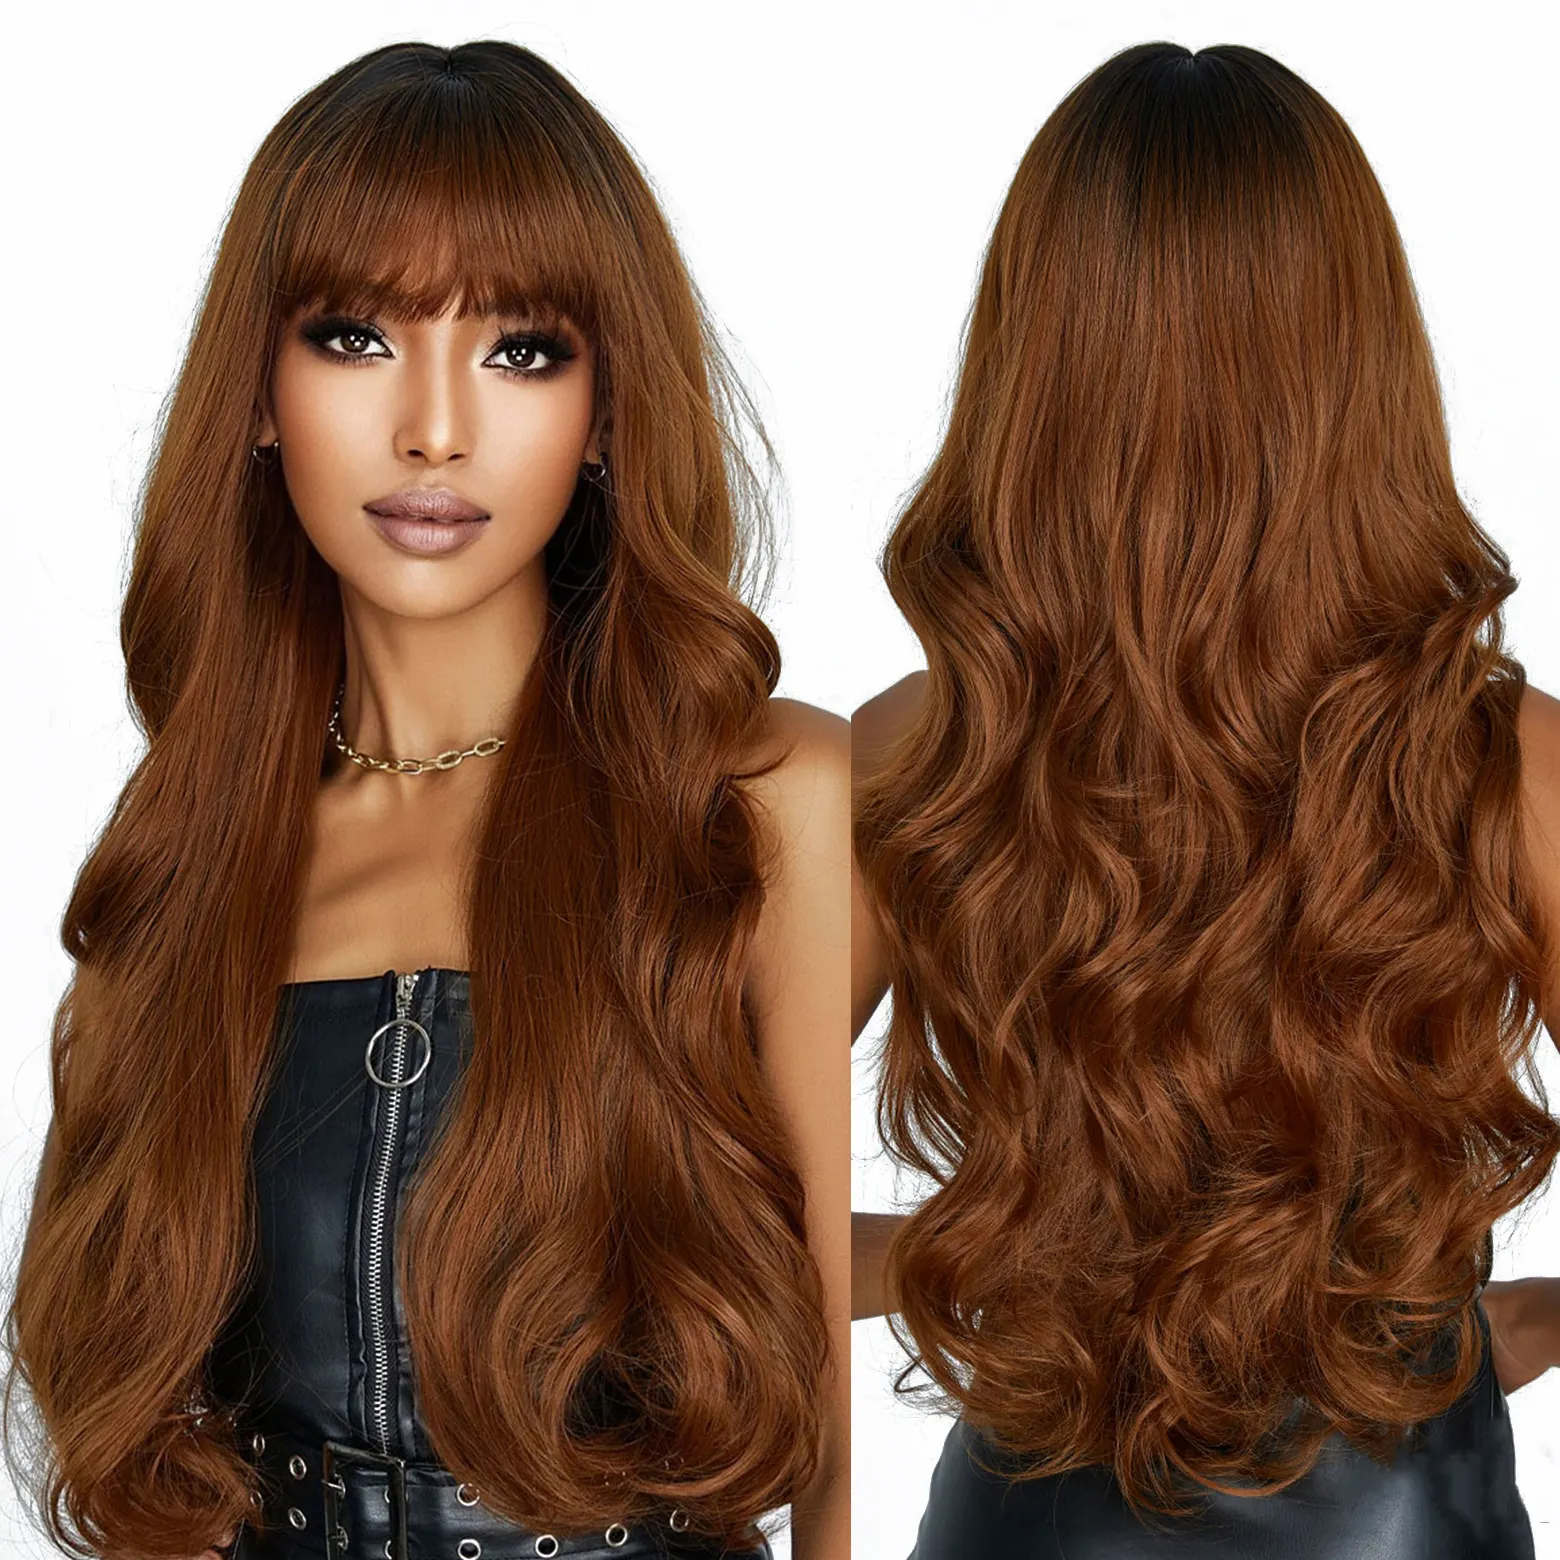 Factory Wholesale Price Ombre Brown Synthetic Heat Resistant Wigs with Bangs Long Water Wavy Chocolate Brown Hairs Wig for Women